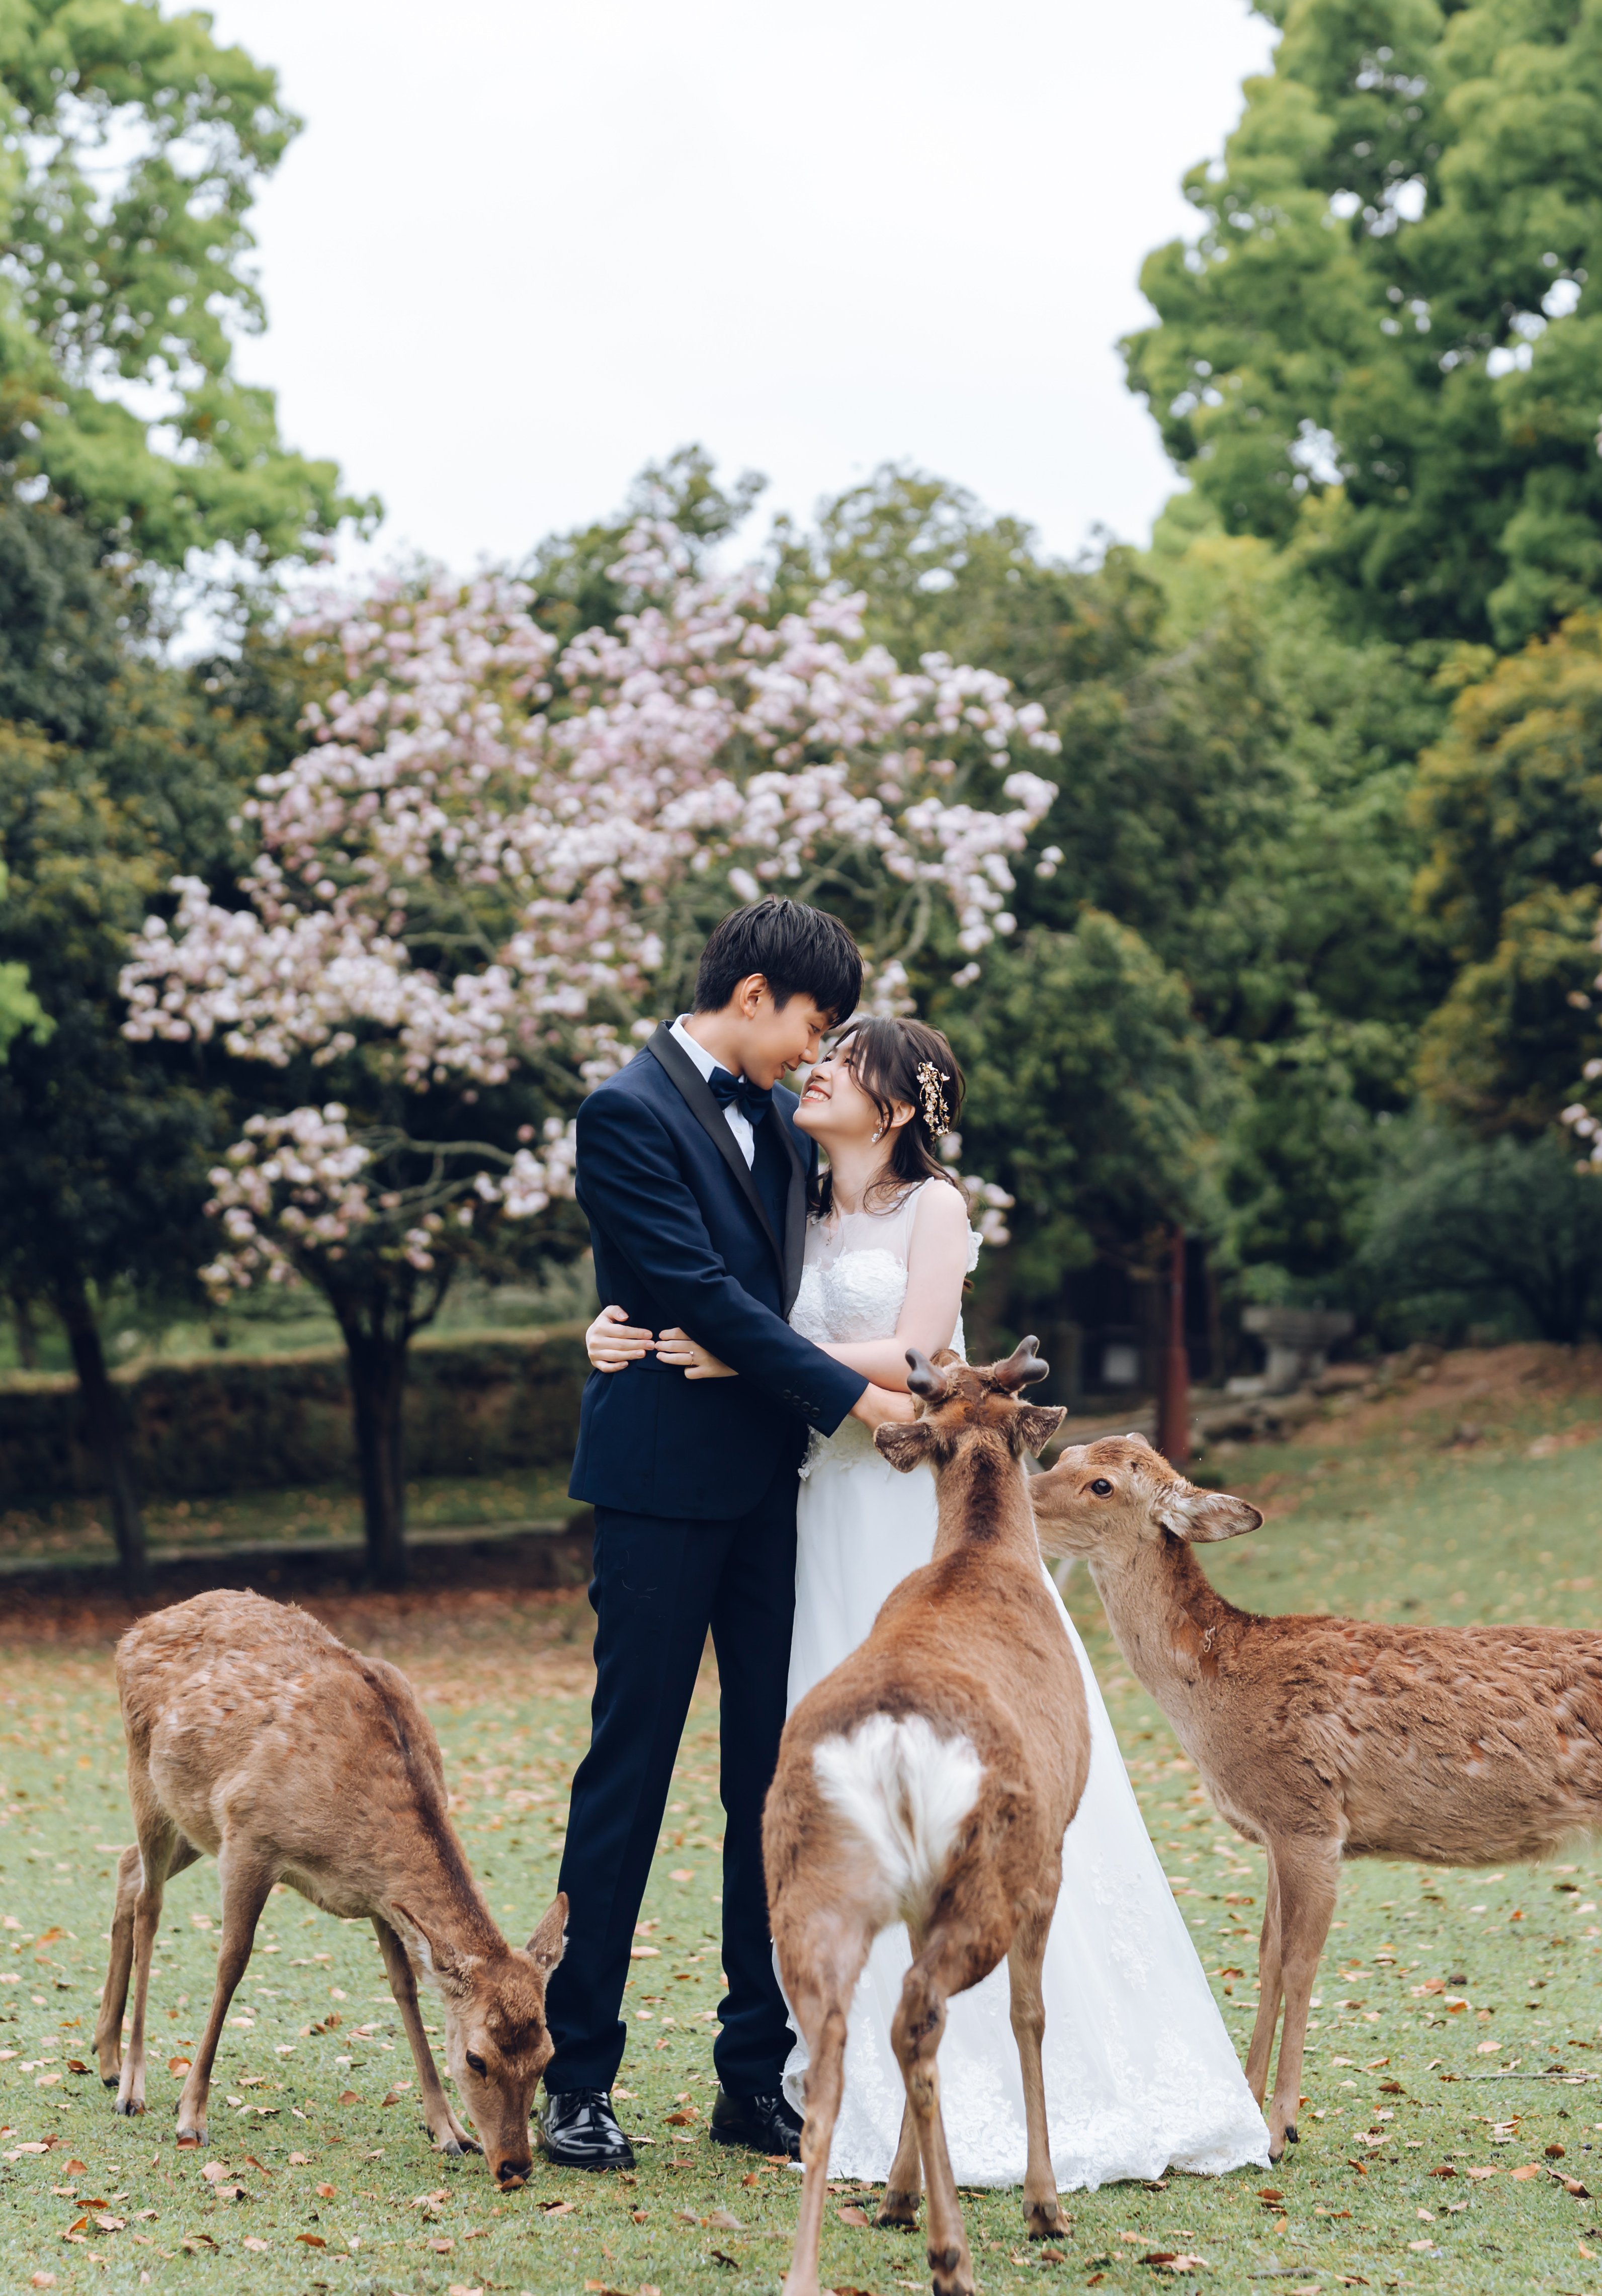 Blooms of Love: Aylsworth & Michele's Kyoto and Nara Spring Engagement